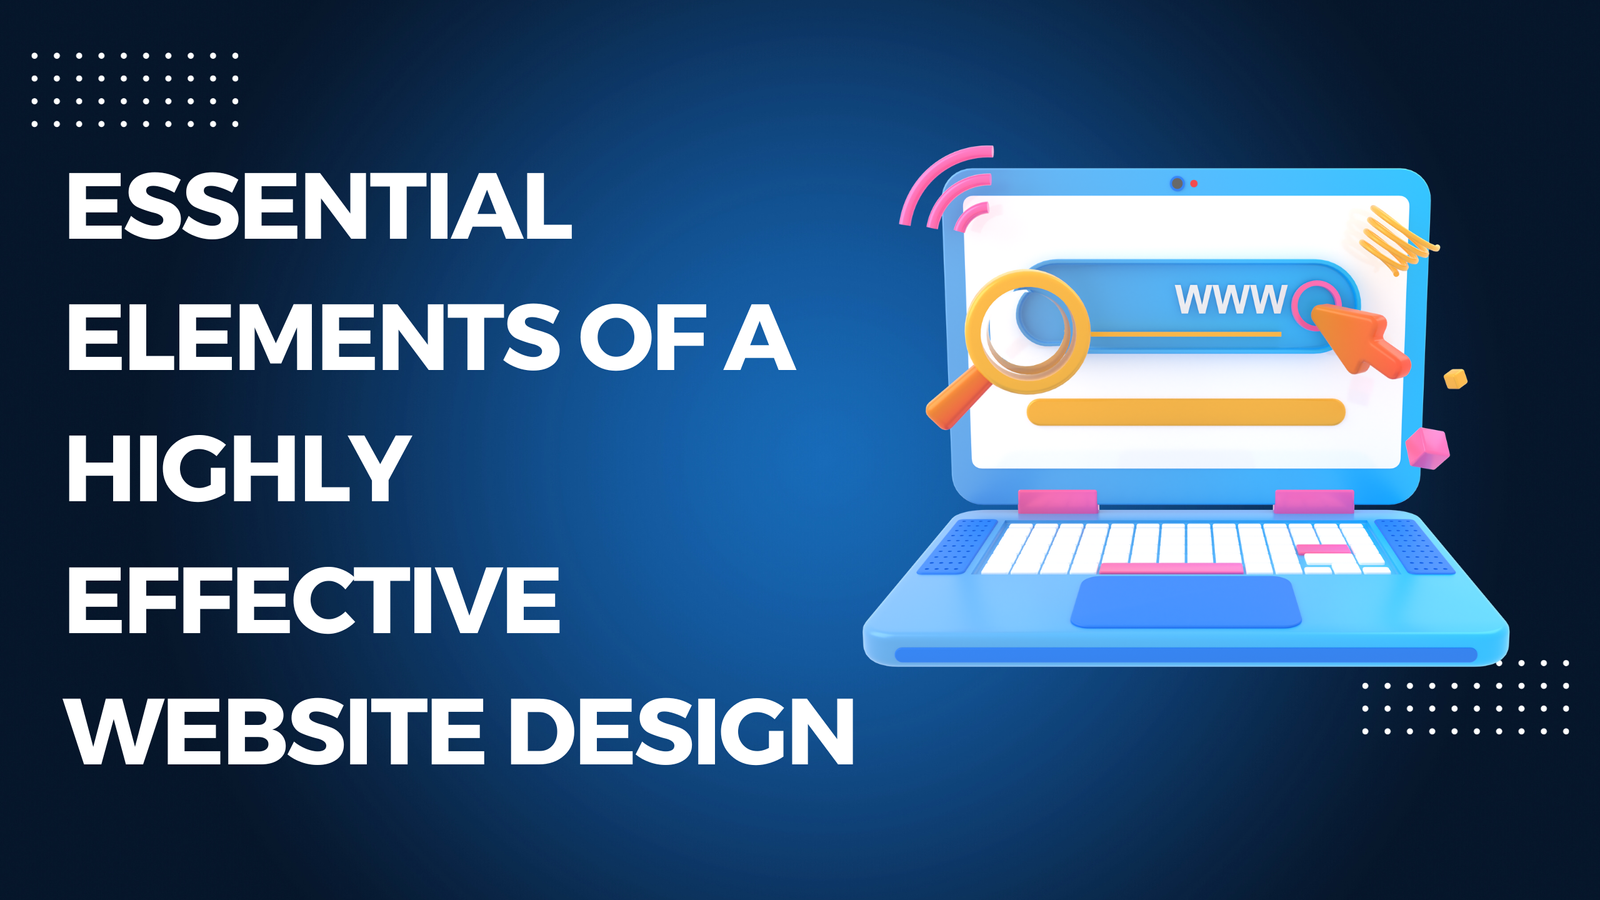 Essential Elements of a Highly Effective Website Design